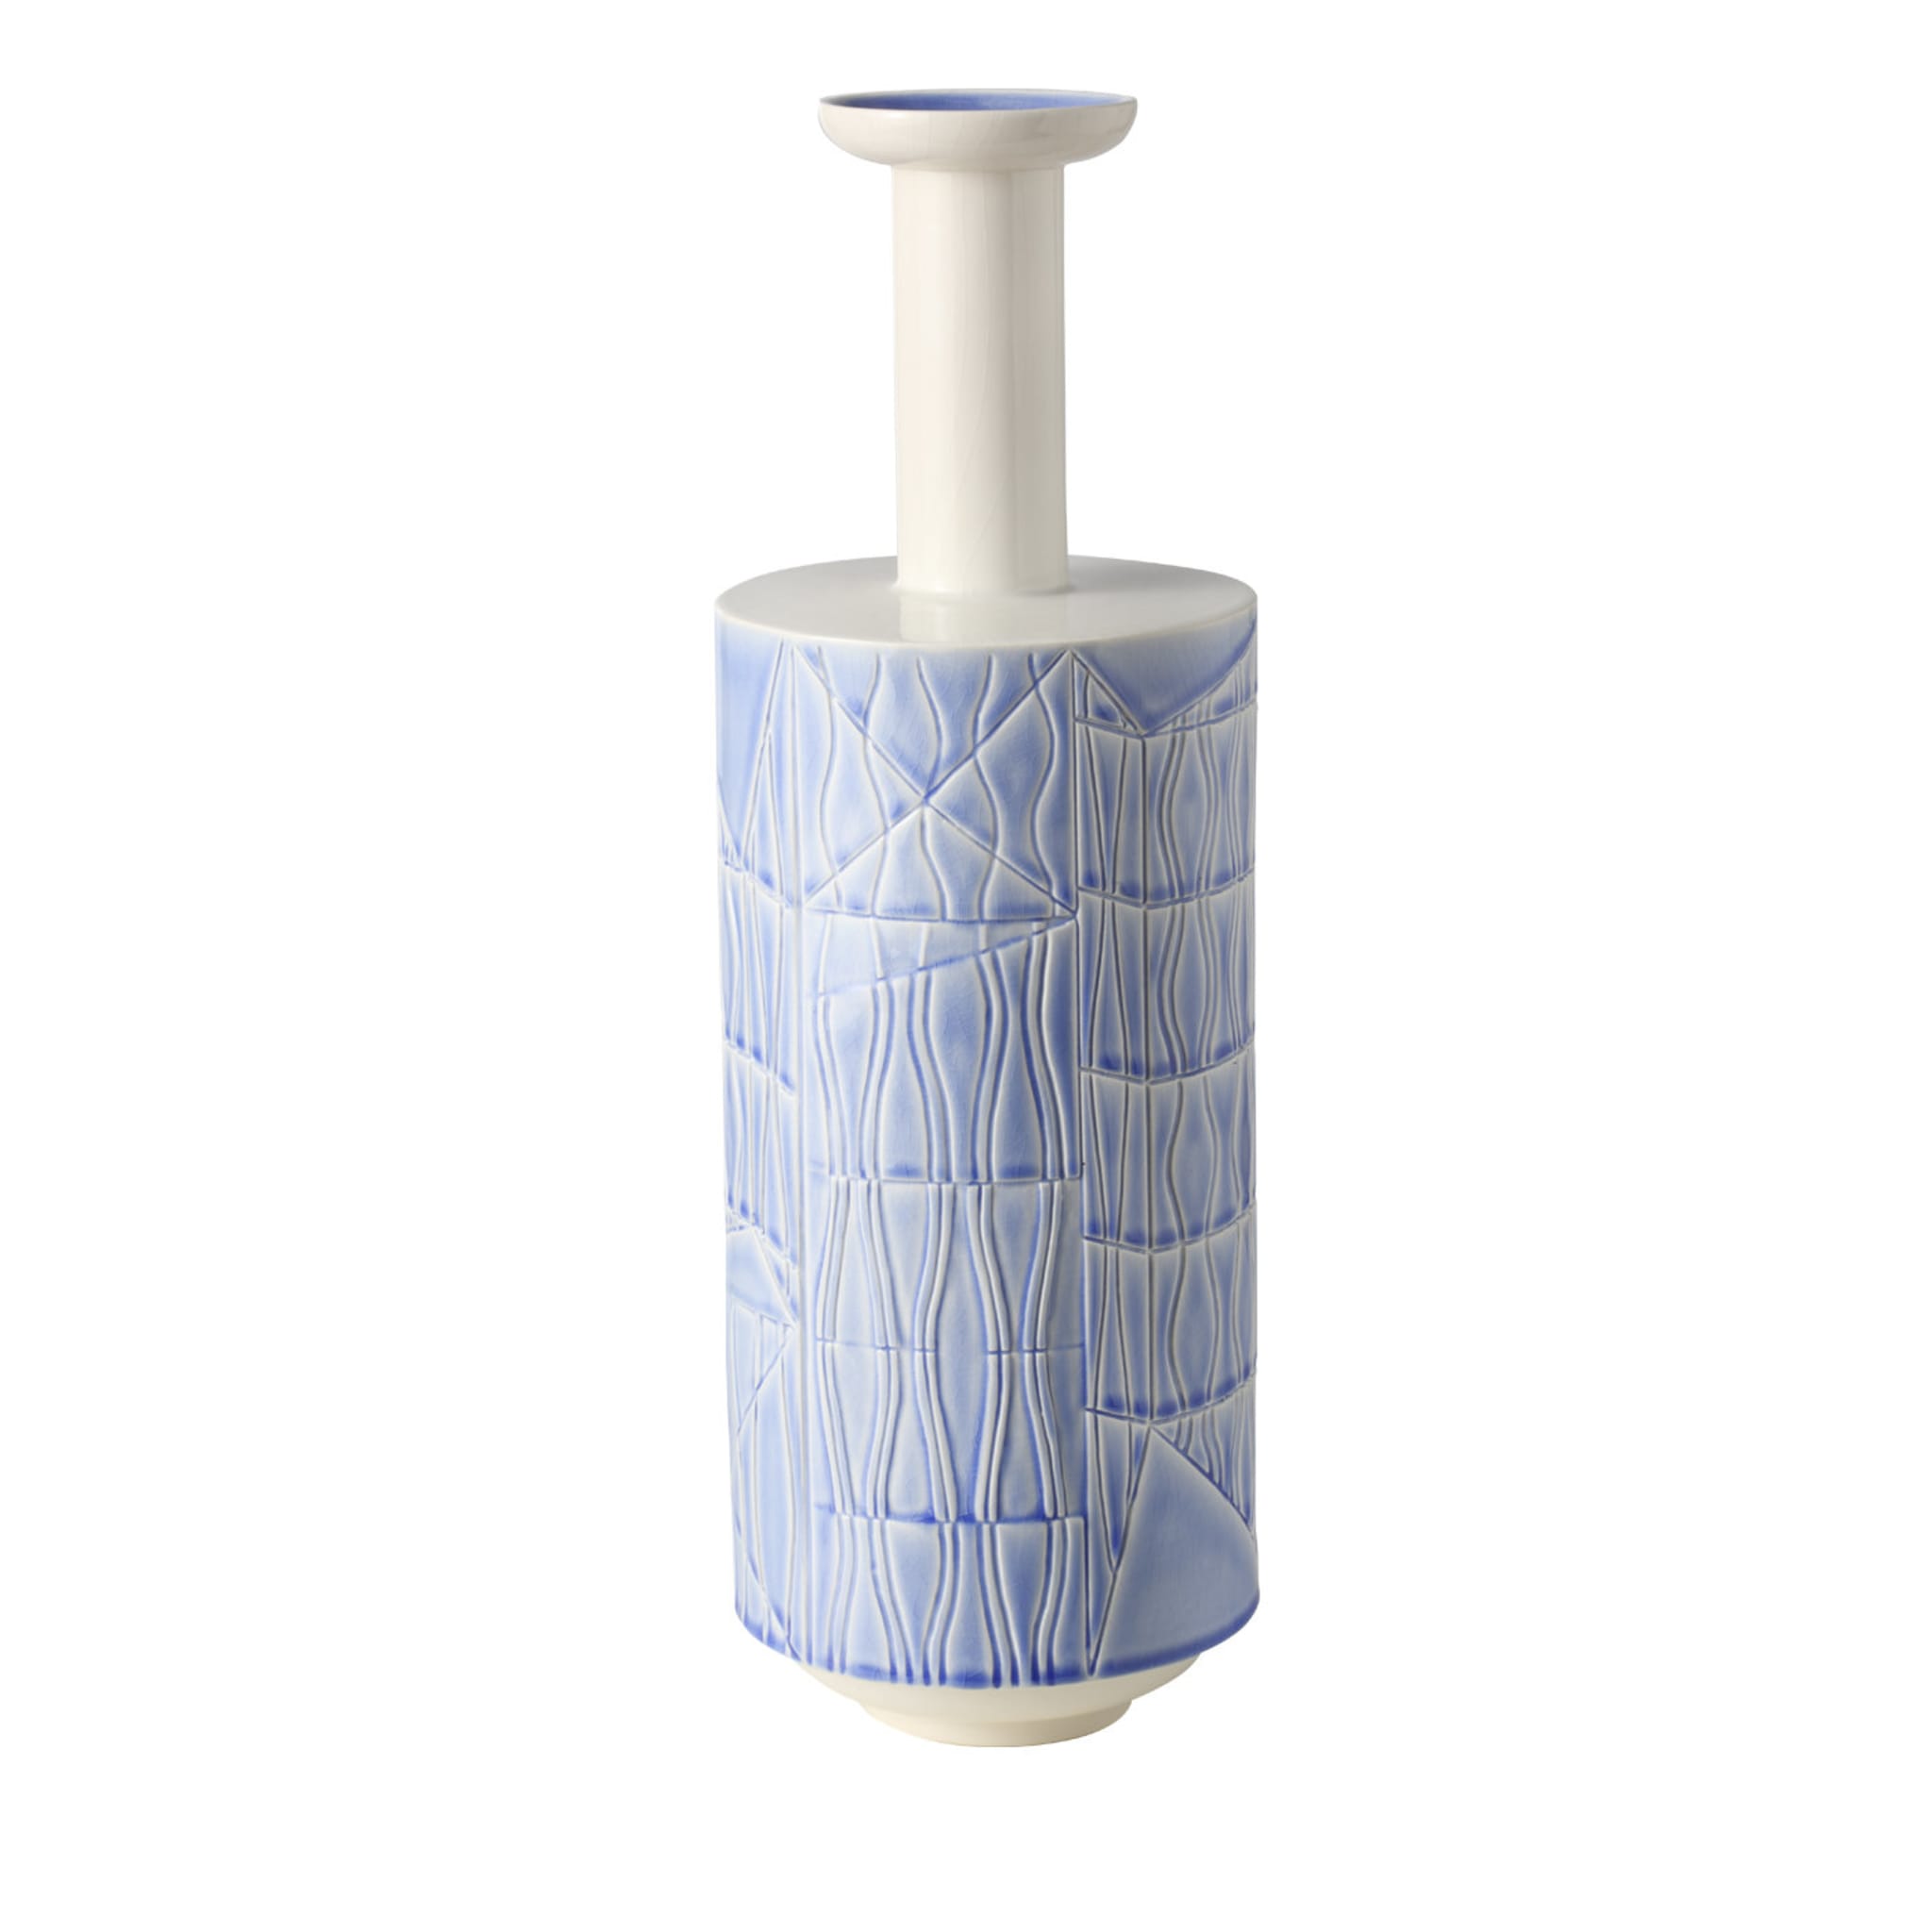 Tall White and Pale Blue Vase by Bethan Laura Wood - Main view